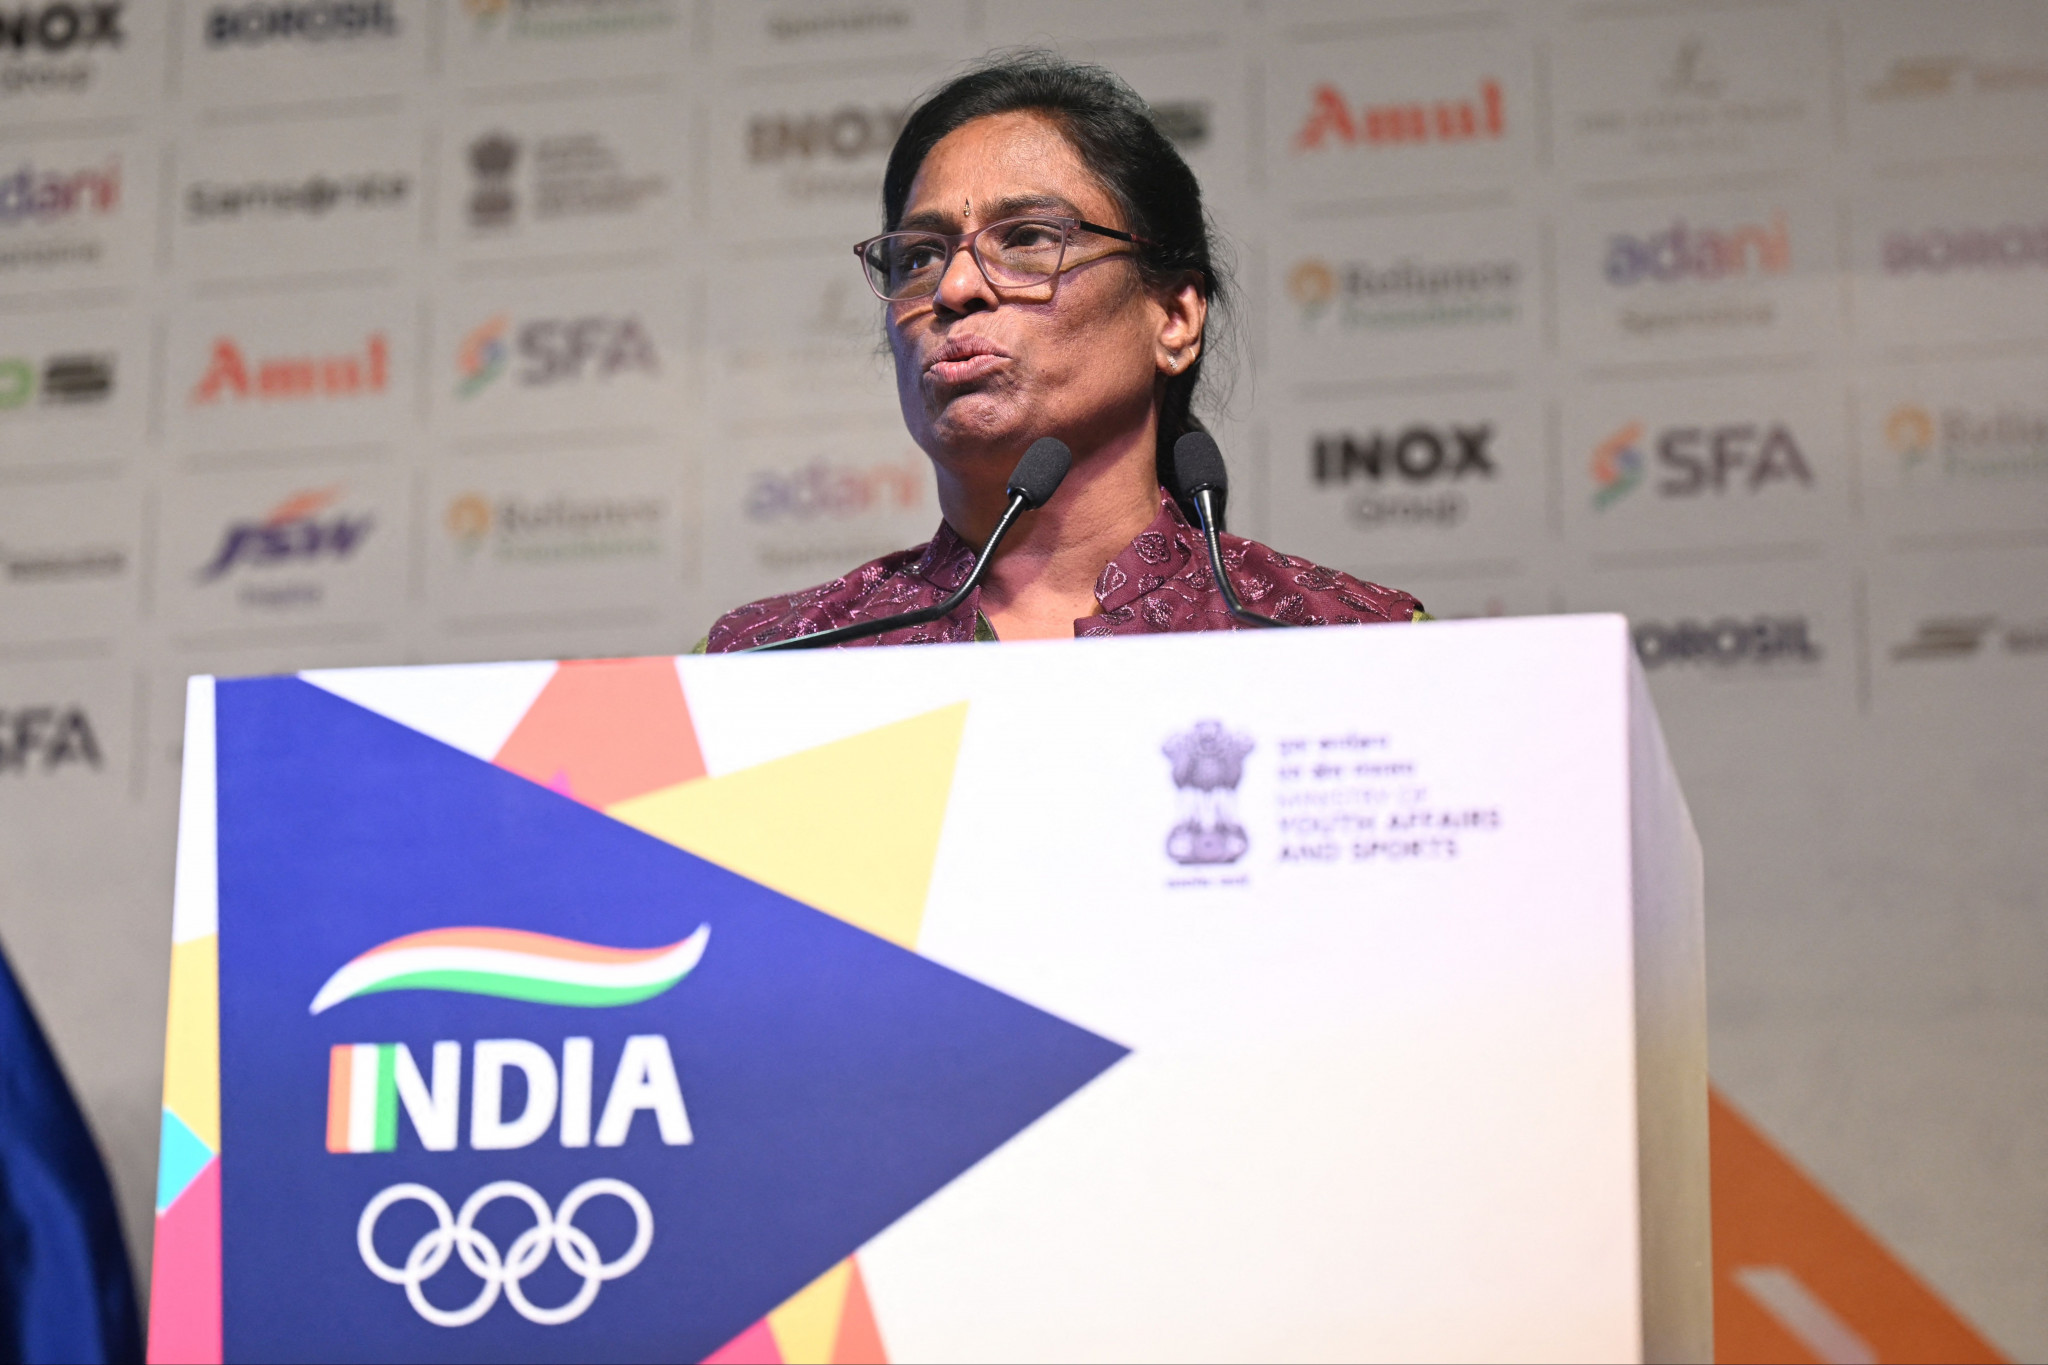 PT Usha was elected as IOA President last year, and Thomas Bach has called for further 